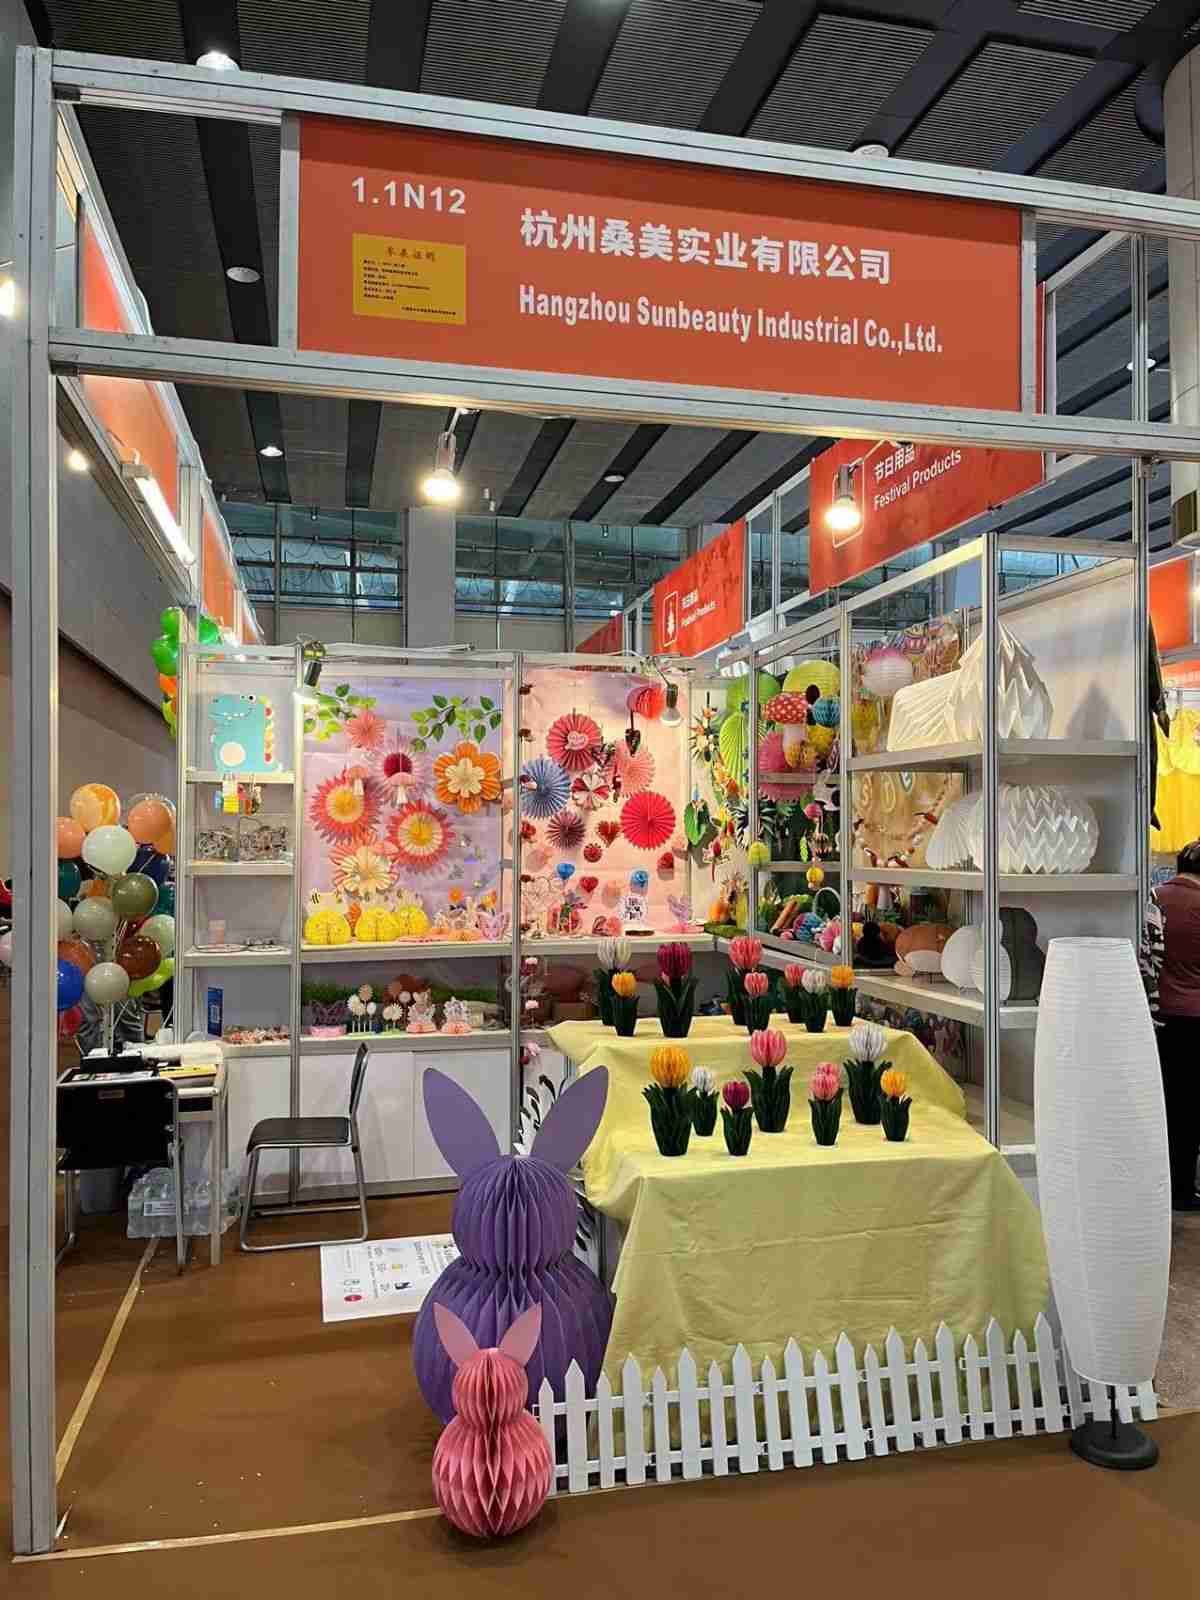 Visit Sunbeauty at the 135th Canton Fair Spring Exhibition